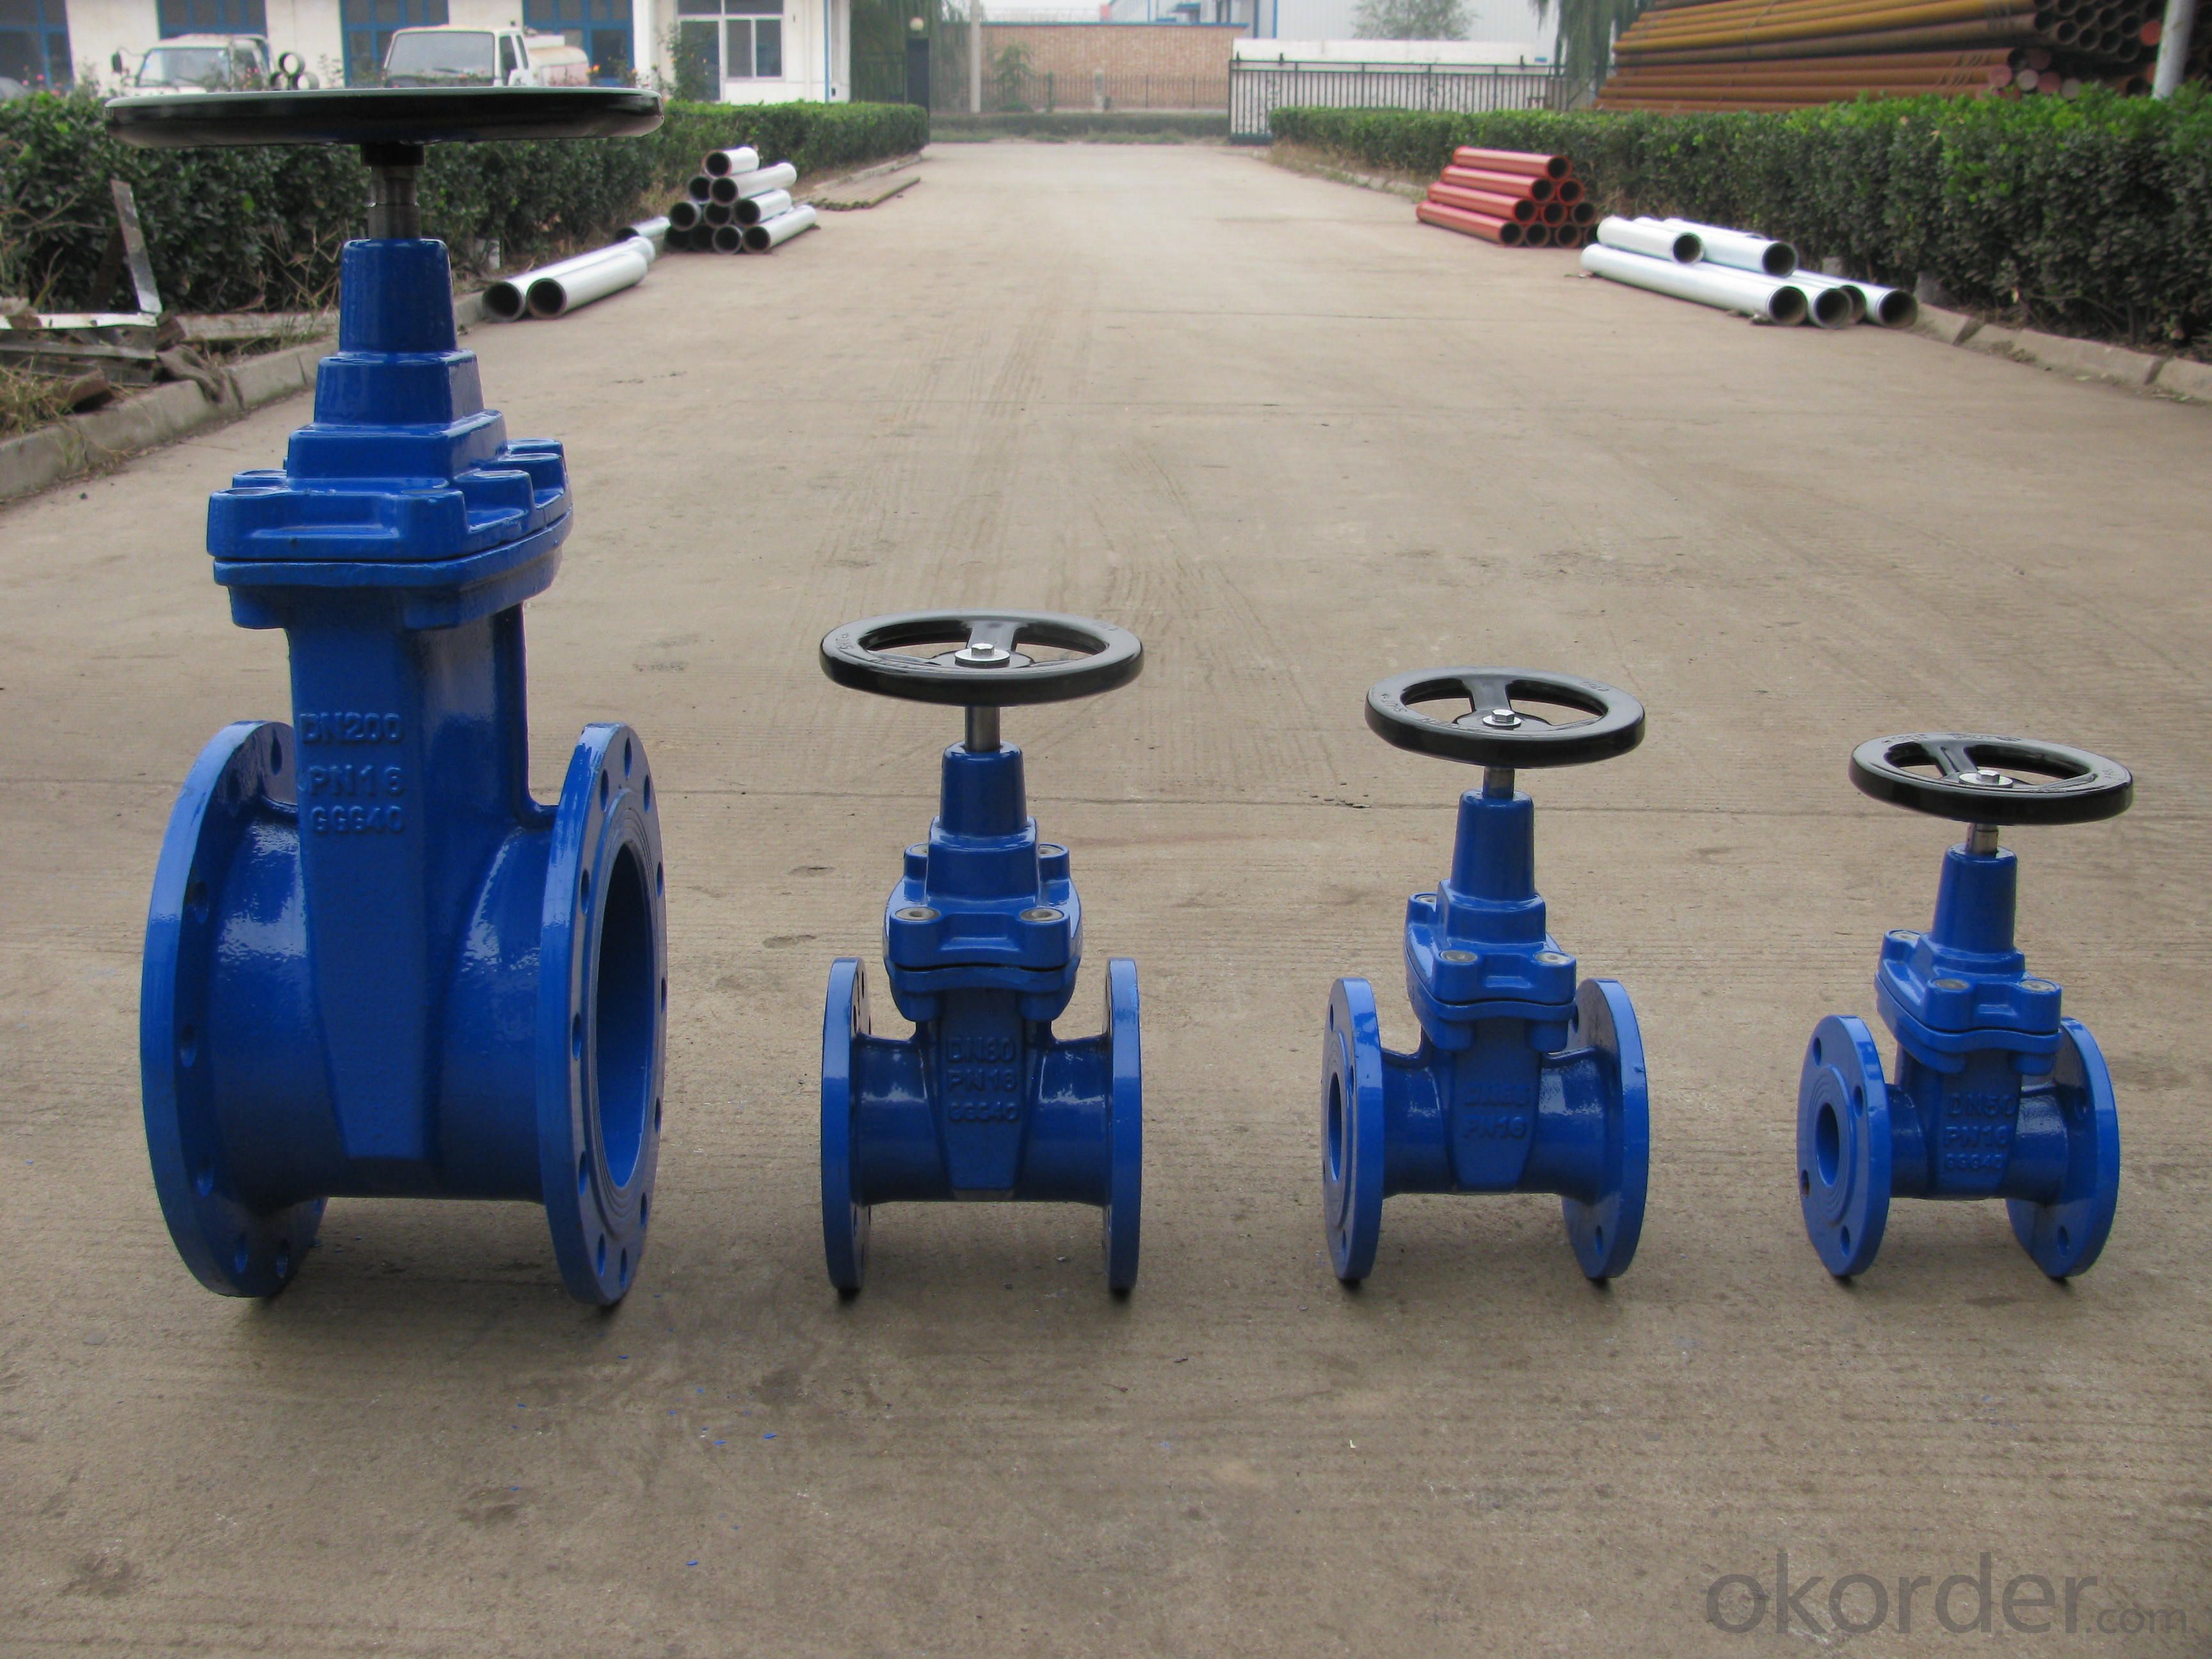 Non-rising Stem Resilient Seated Gate Valve DN40